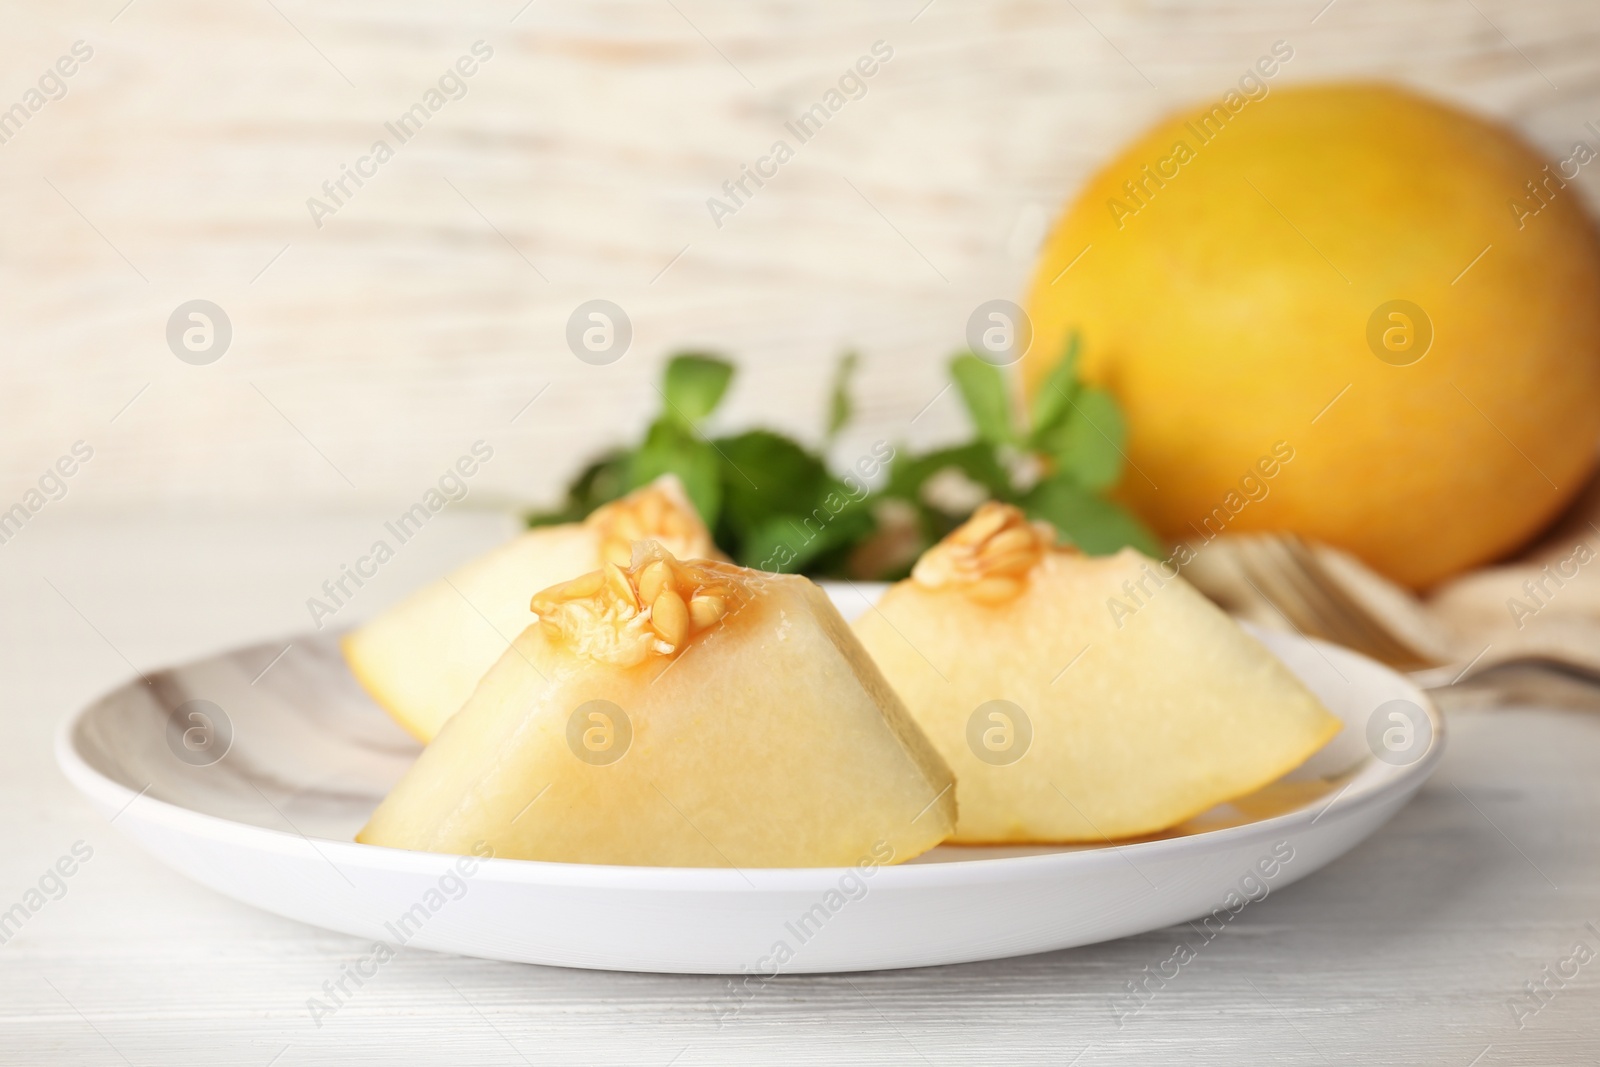 Photo of Plate with cut sweet melon on table